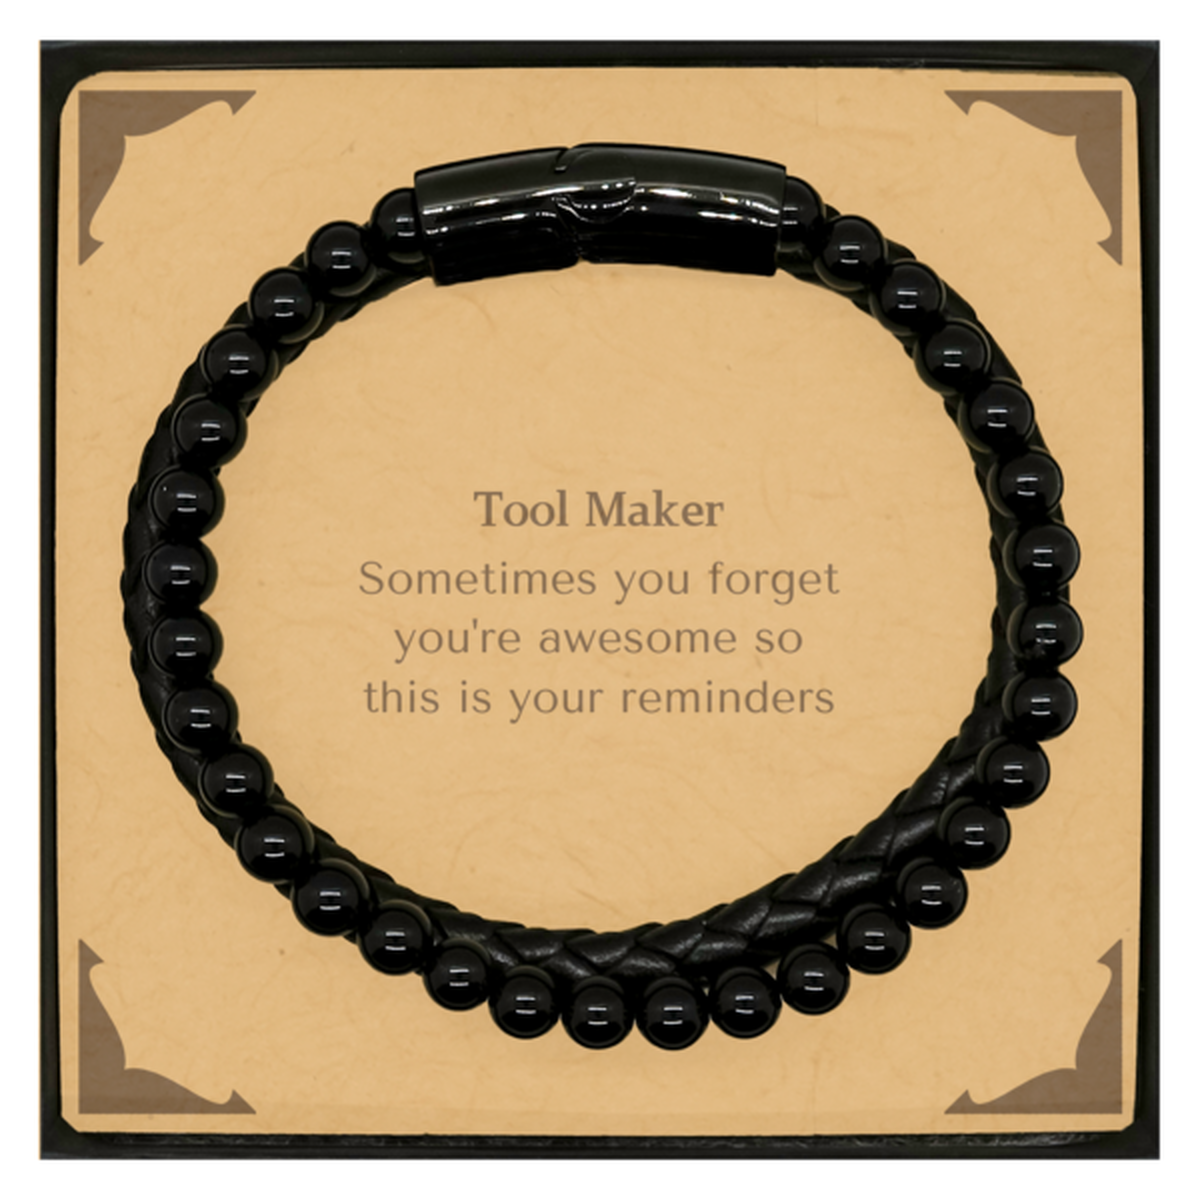 Sentimental Tool Maker Stone Leather Bracelets, Tool Maker Sometimes you forget you're awesome so this is your reminders, Graduation Christmas Birthday Gifts for Tool Maker, Men, Women, Coworkers